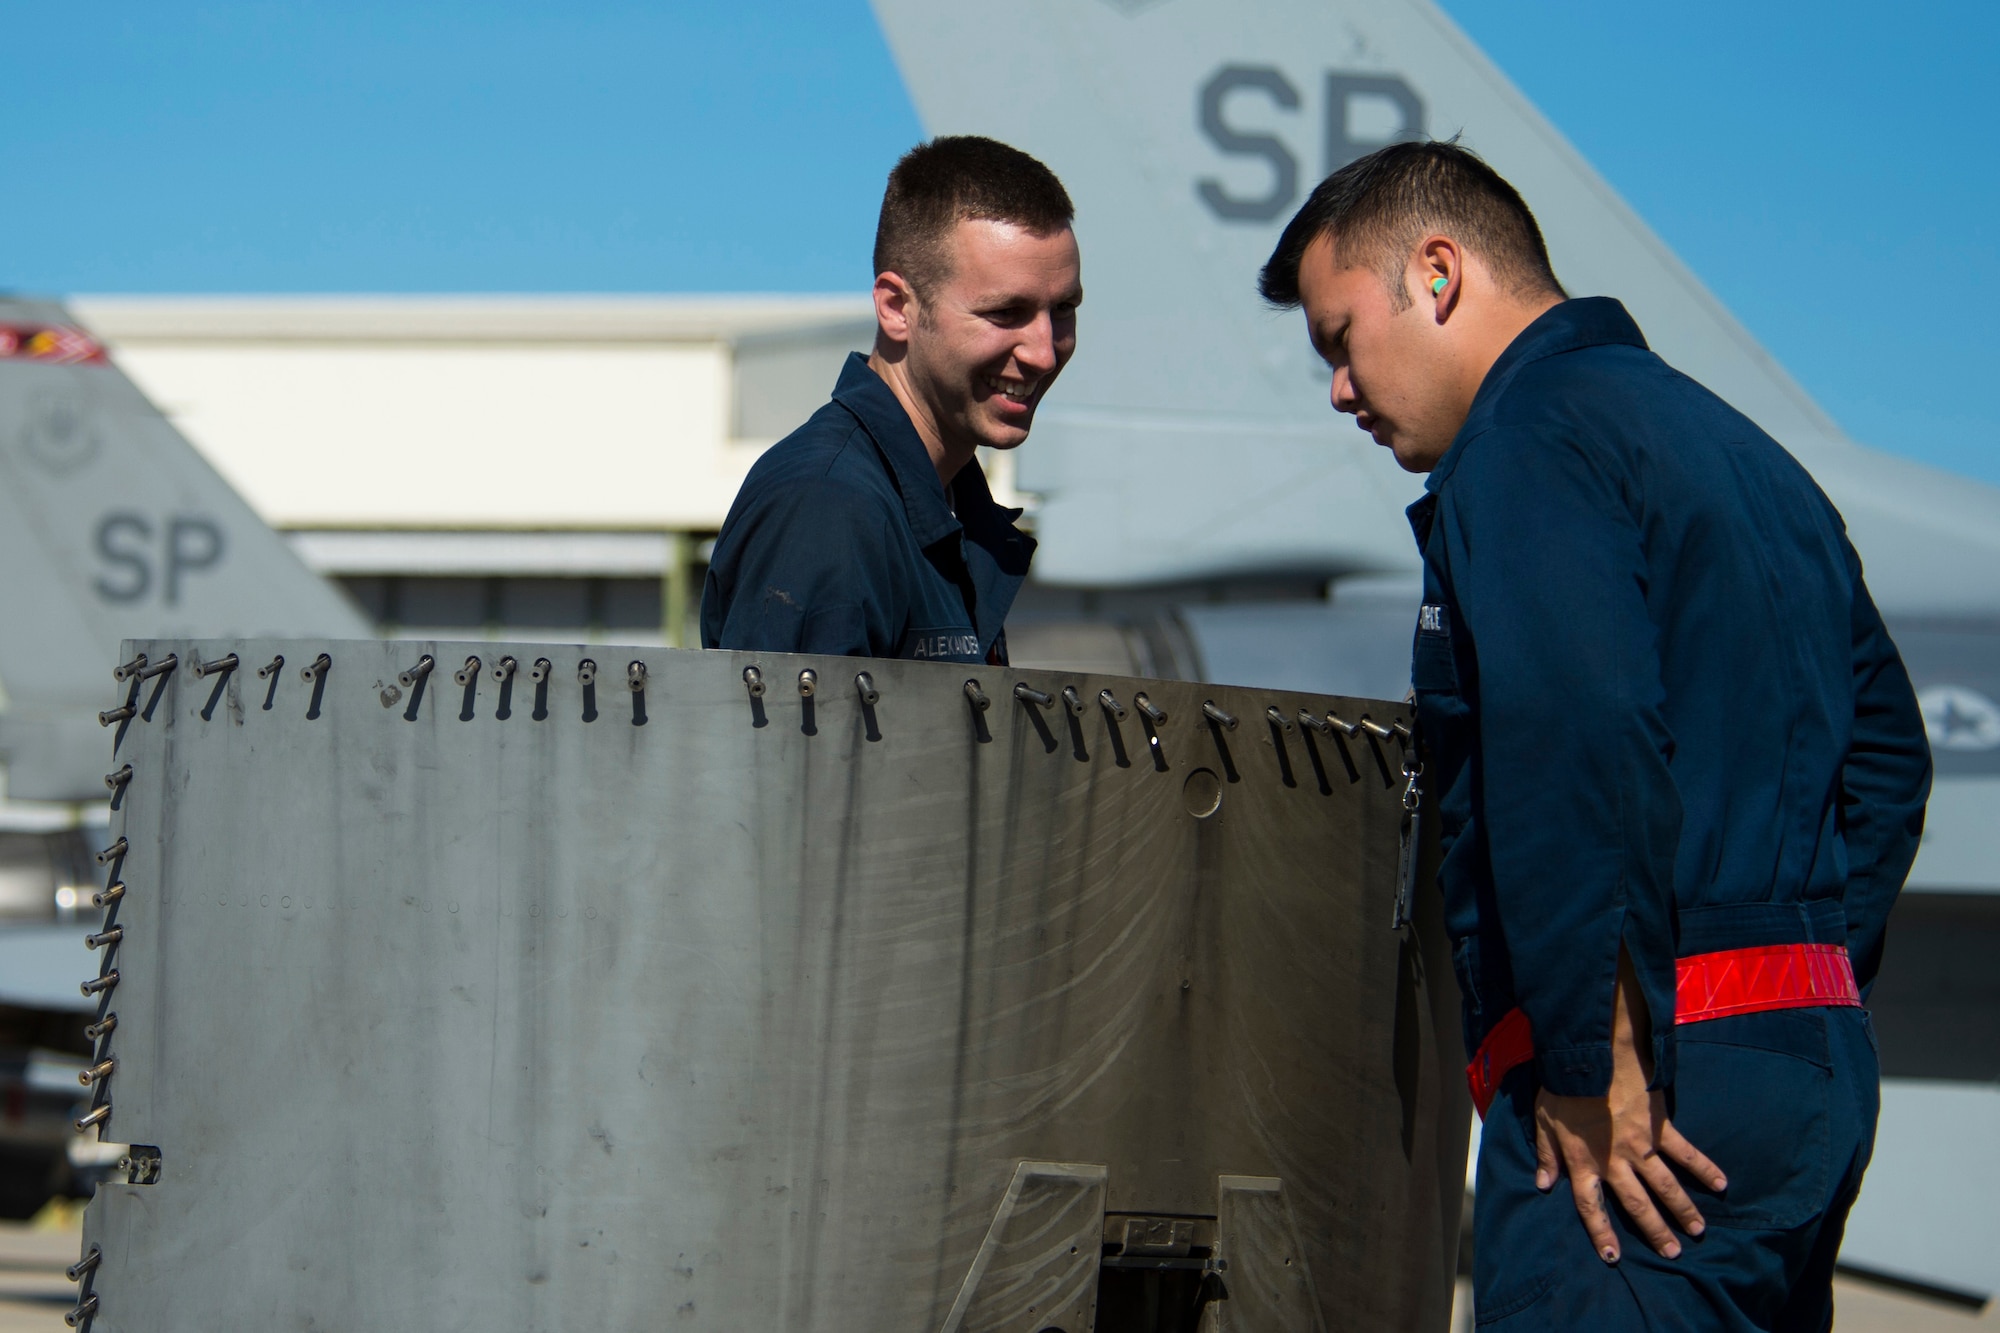 BEJA AIR BASE, Portugal – U.S. Air Force Staff Sgt. Derek Alexander, 52nd Aircraft Maintenance Squadron crew chief, left, and U.S. Air Force Staff Sgt. Ramon Salas, 52nd AMXS electrical and environmental systems craftsman, remove an engine panel from a 480th Fighter Squadron F-16 Fighting Falcon fighter aircraft at Beja Air Base, Portugal, Oct. 22, 2015. U.S. participation in Trident Juncture 2015l includes Army, Air Force, Navy, Marine Corps and special operations assets, to include some Army National Guard and Air National Guard assets.  (U.S. Air Force photo by Airman 1st Class Luke Kitterman/Released)